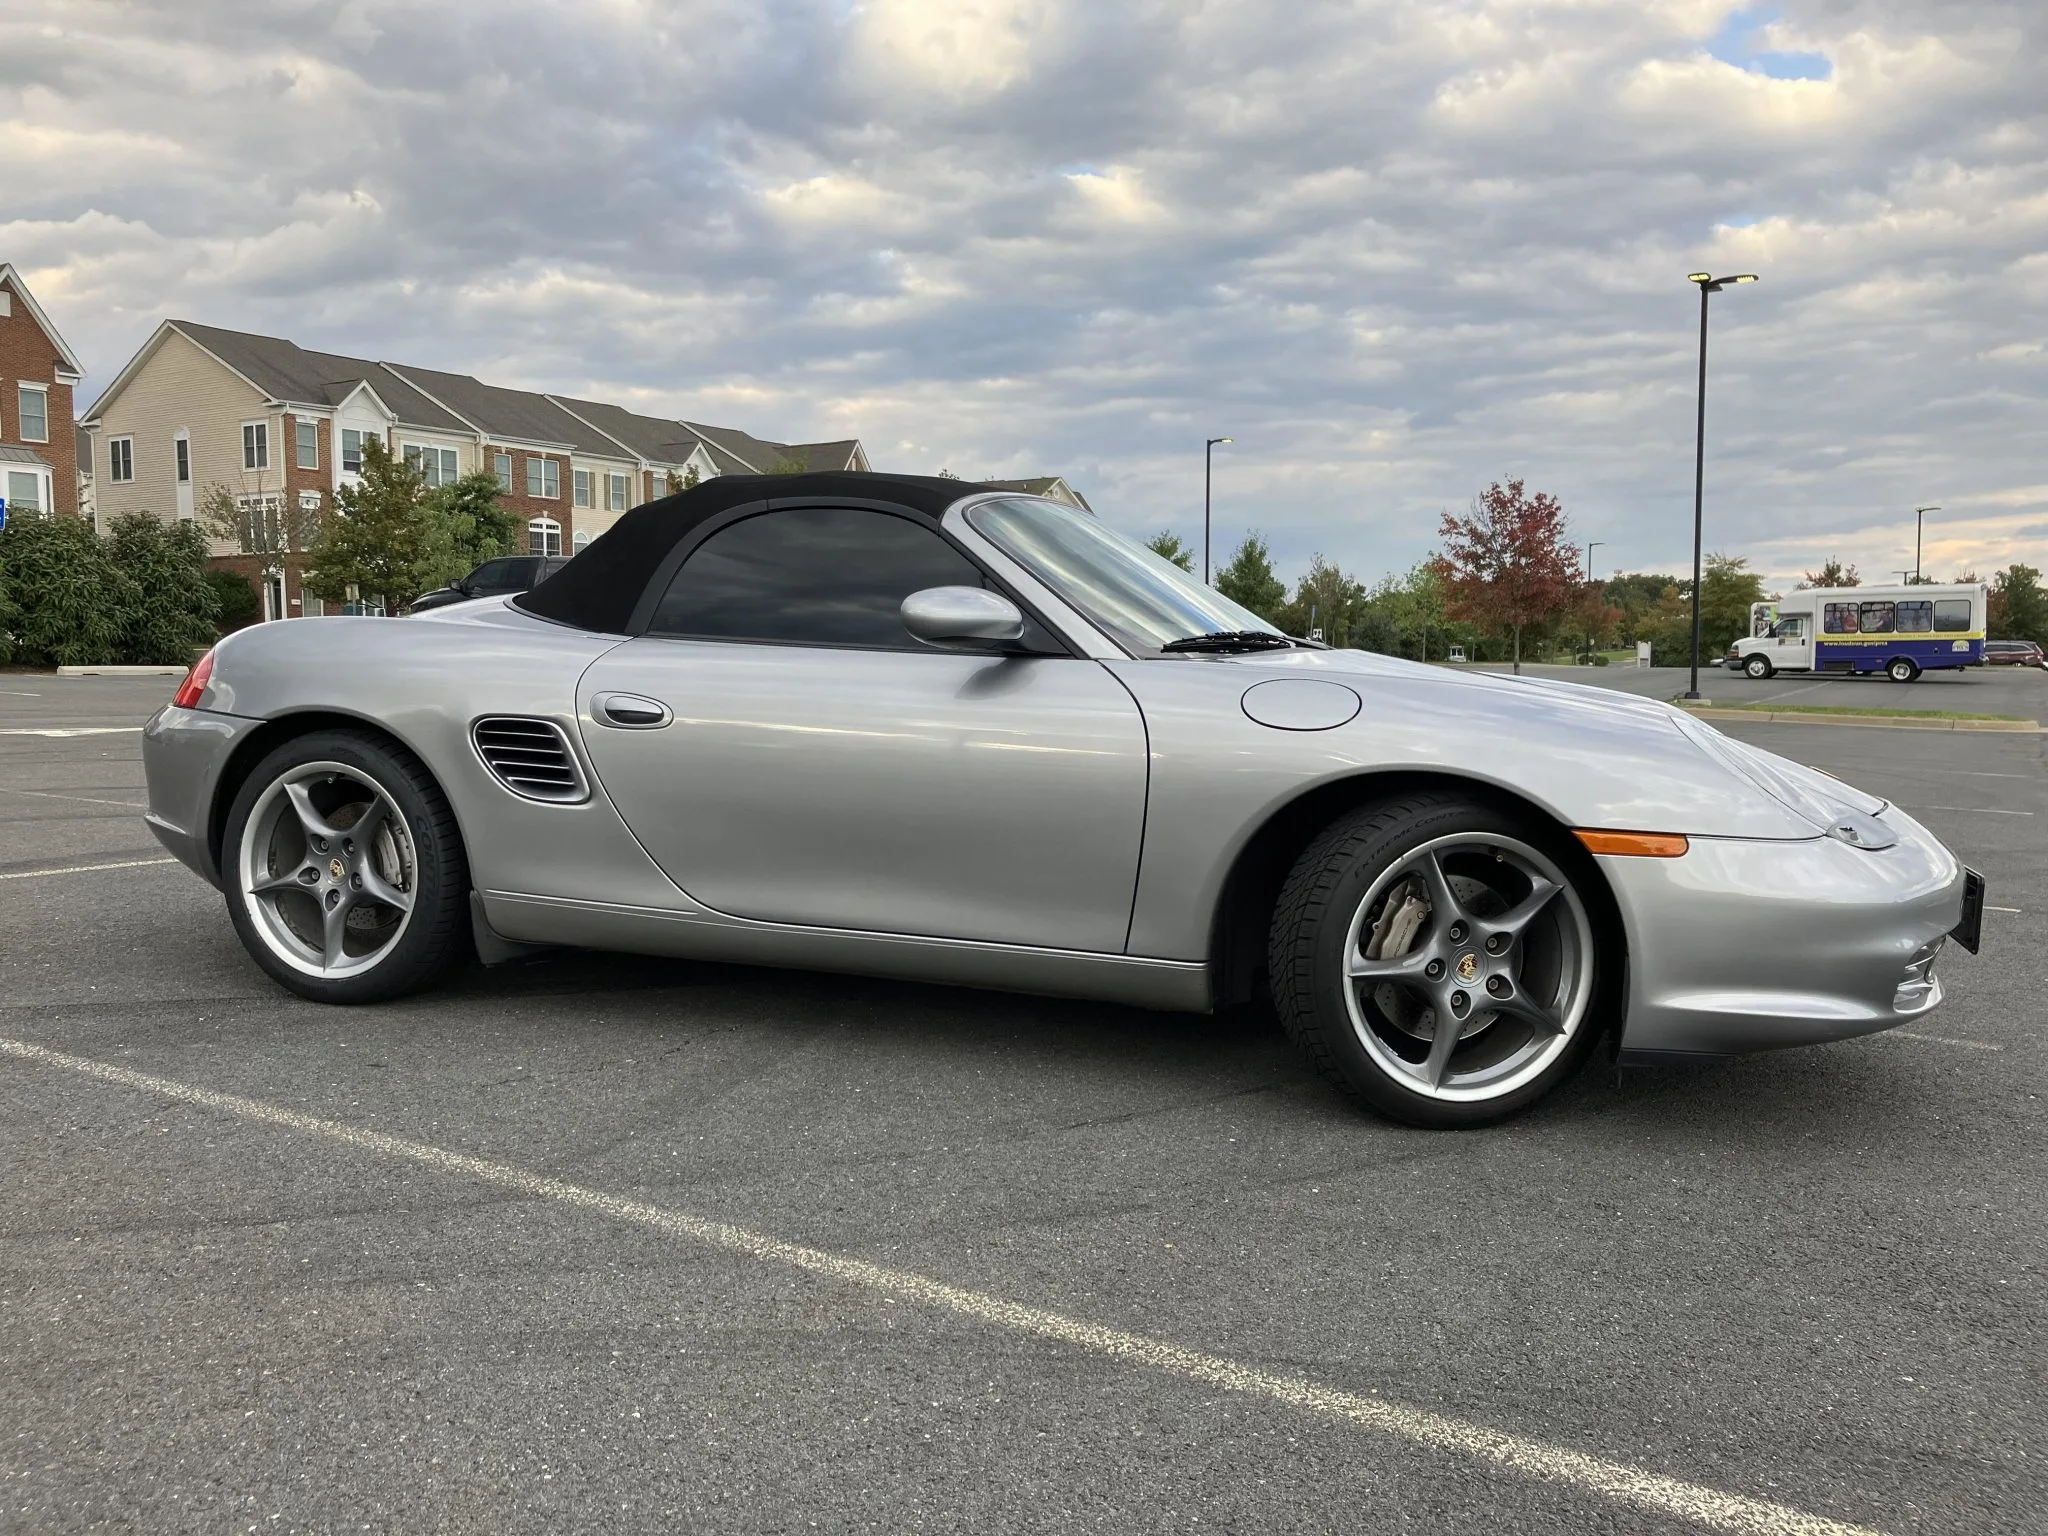 Well-Optioned 2004 Porsche Boxster S 550 Anniversary Edition For Sale!